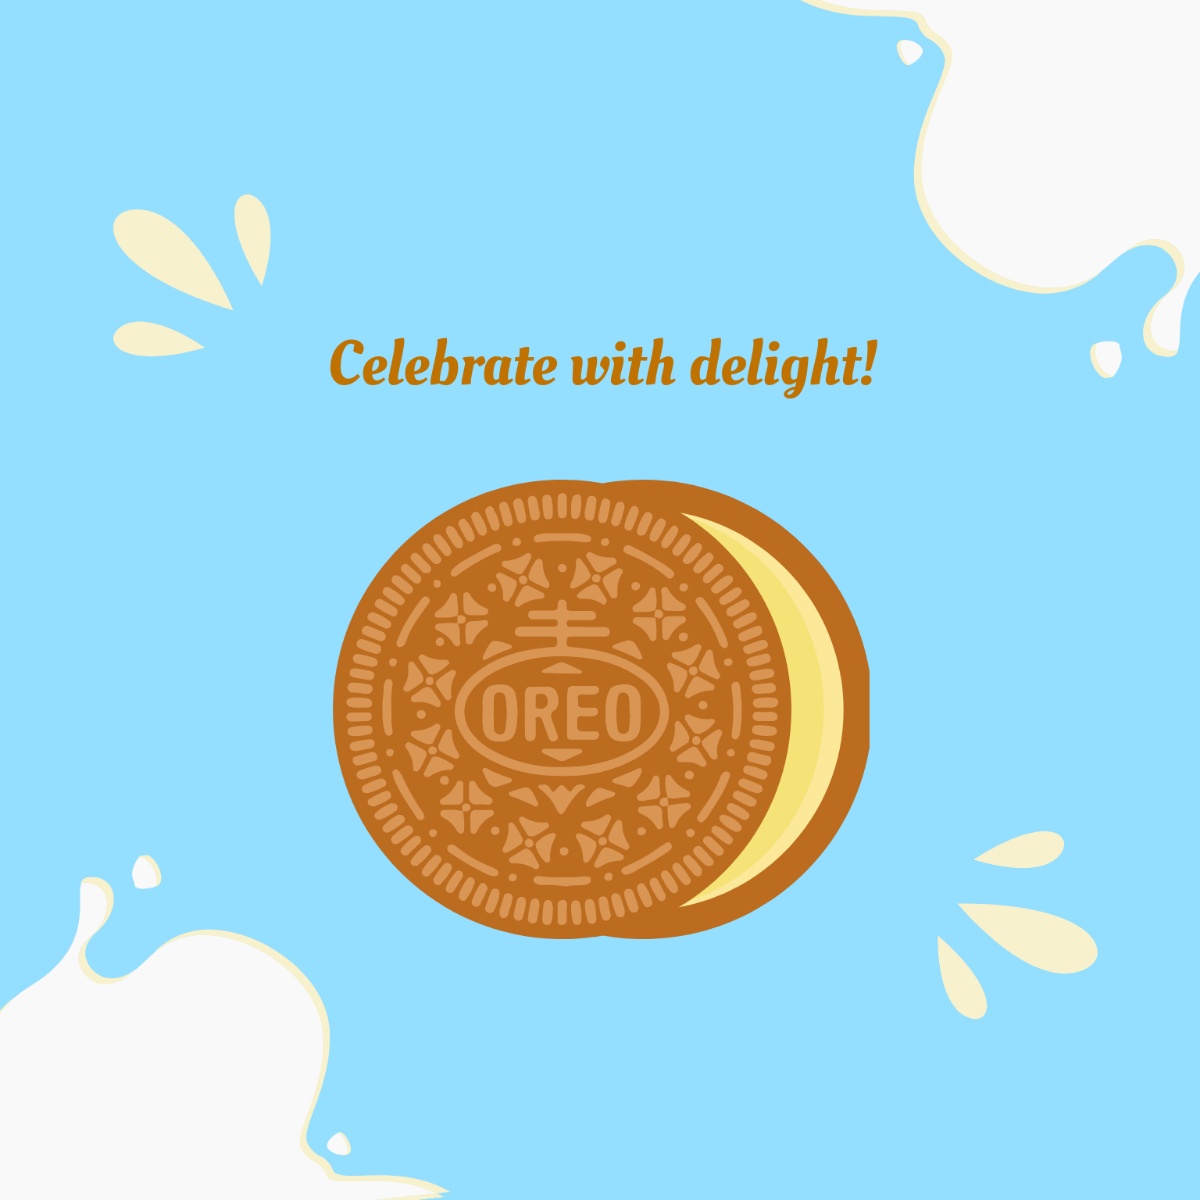 Free National Oreo Cookie Day Celebration Vector Template